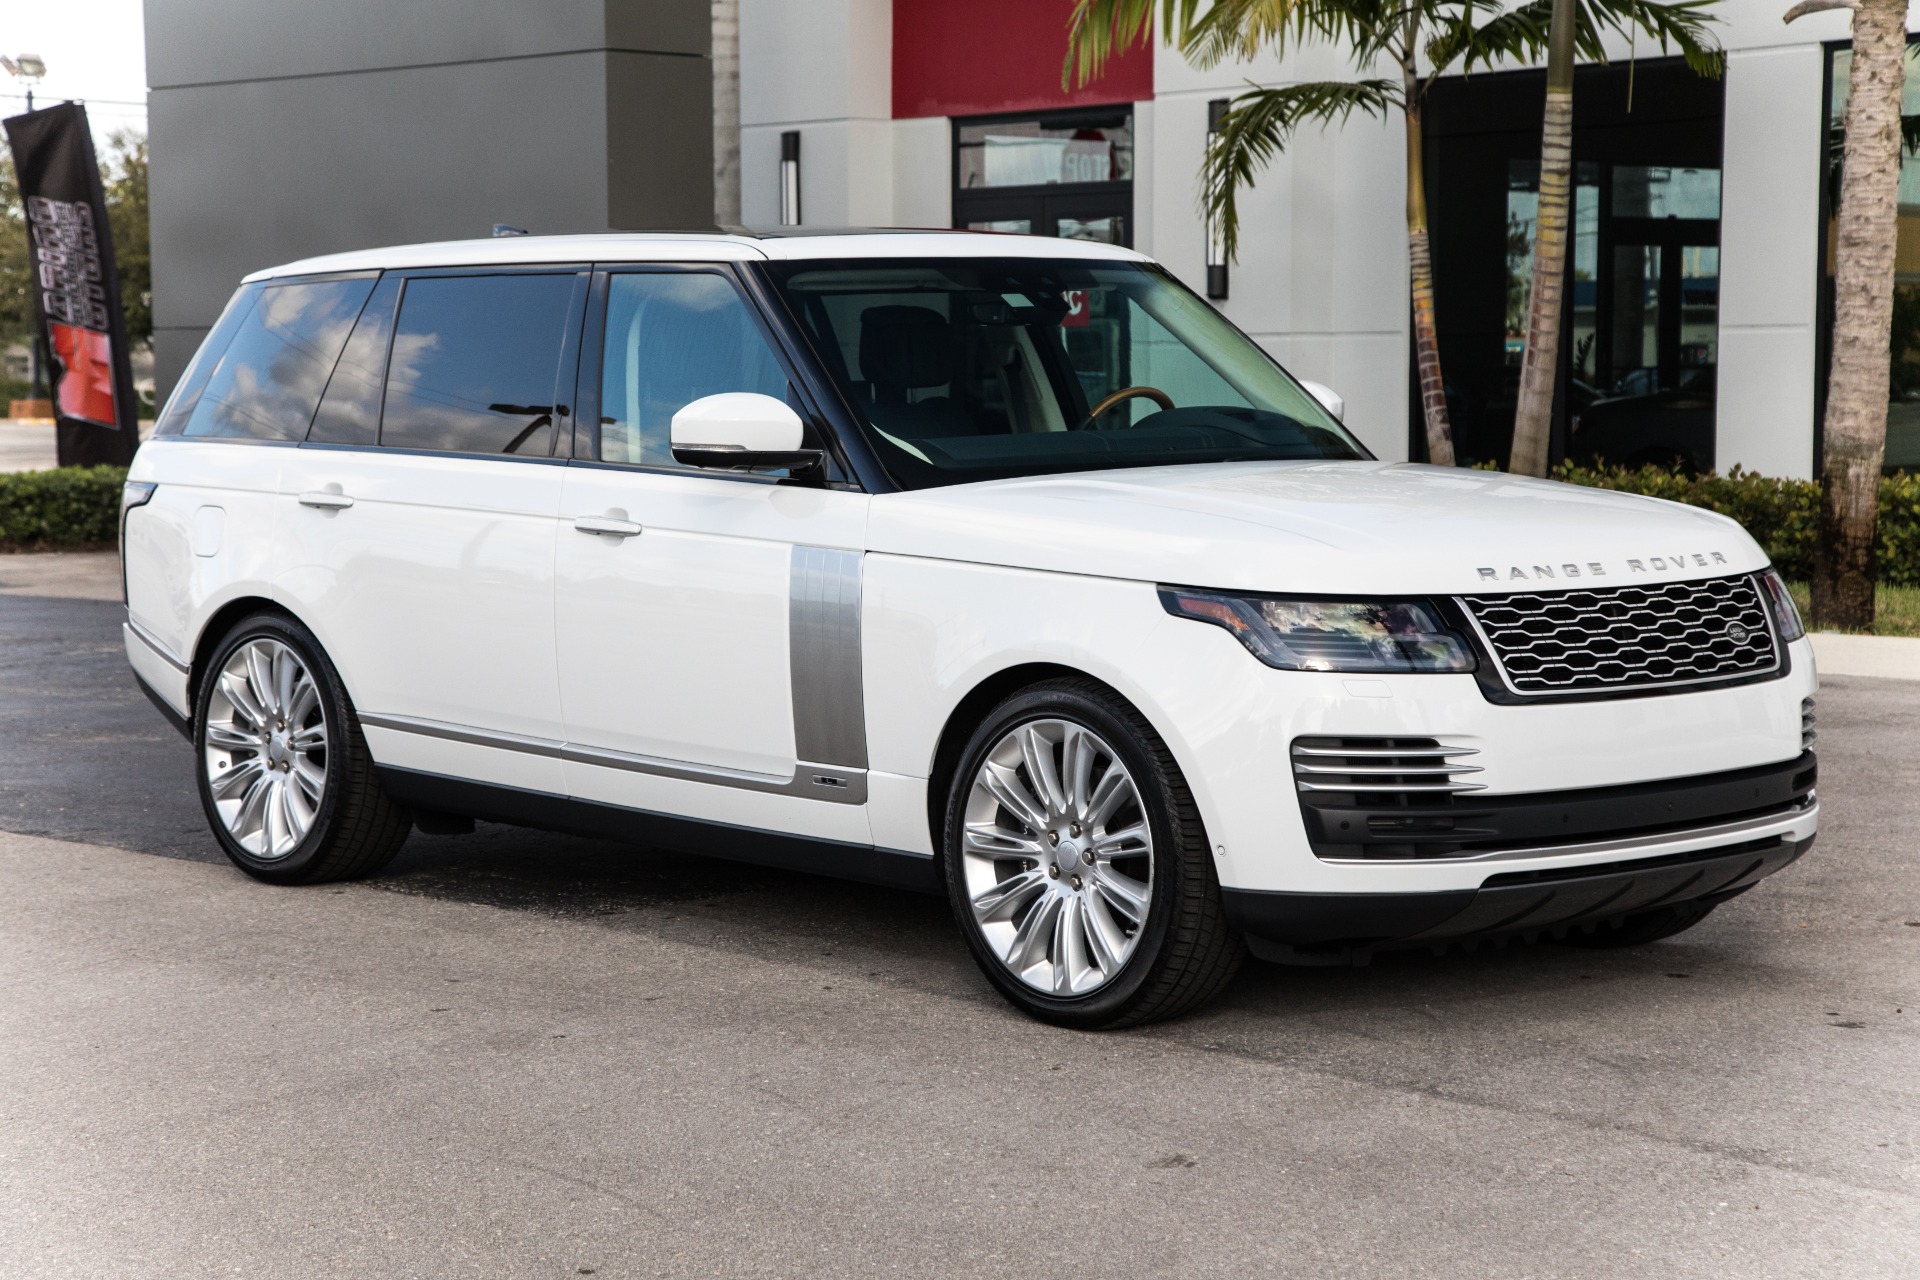 Used 2018 Land Rover Range Rover Autobiography LWB For Sale (116,900